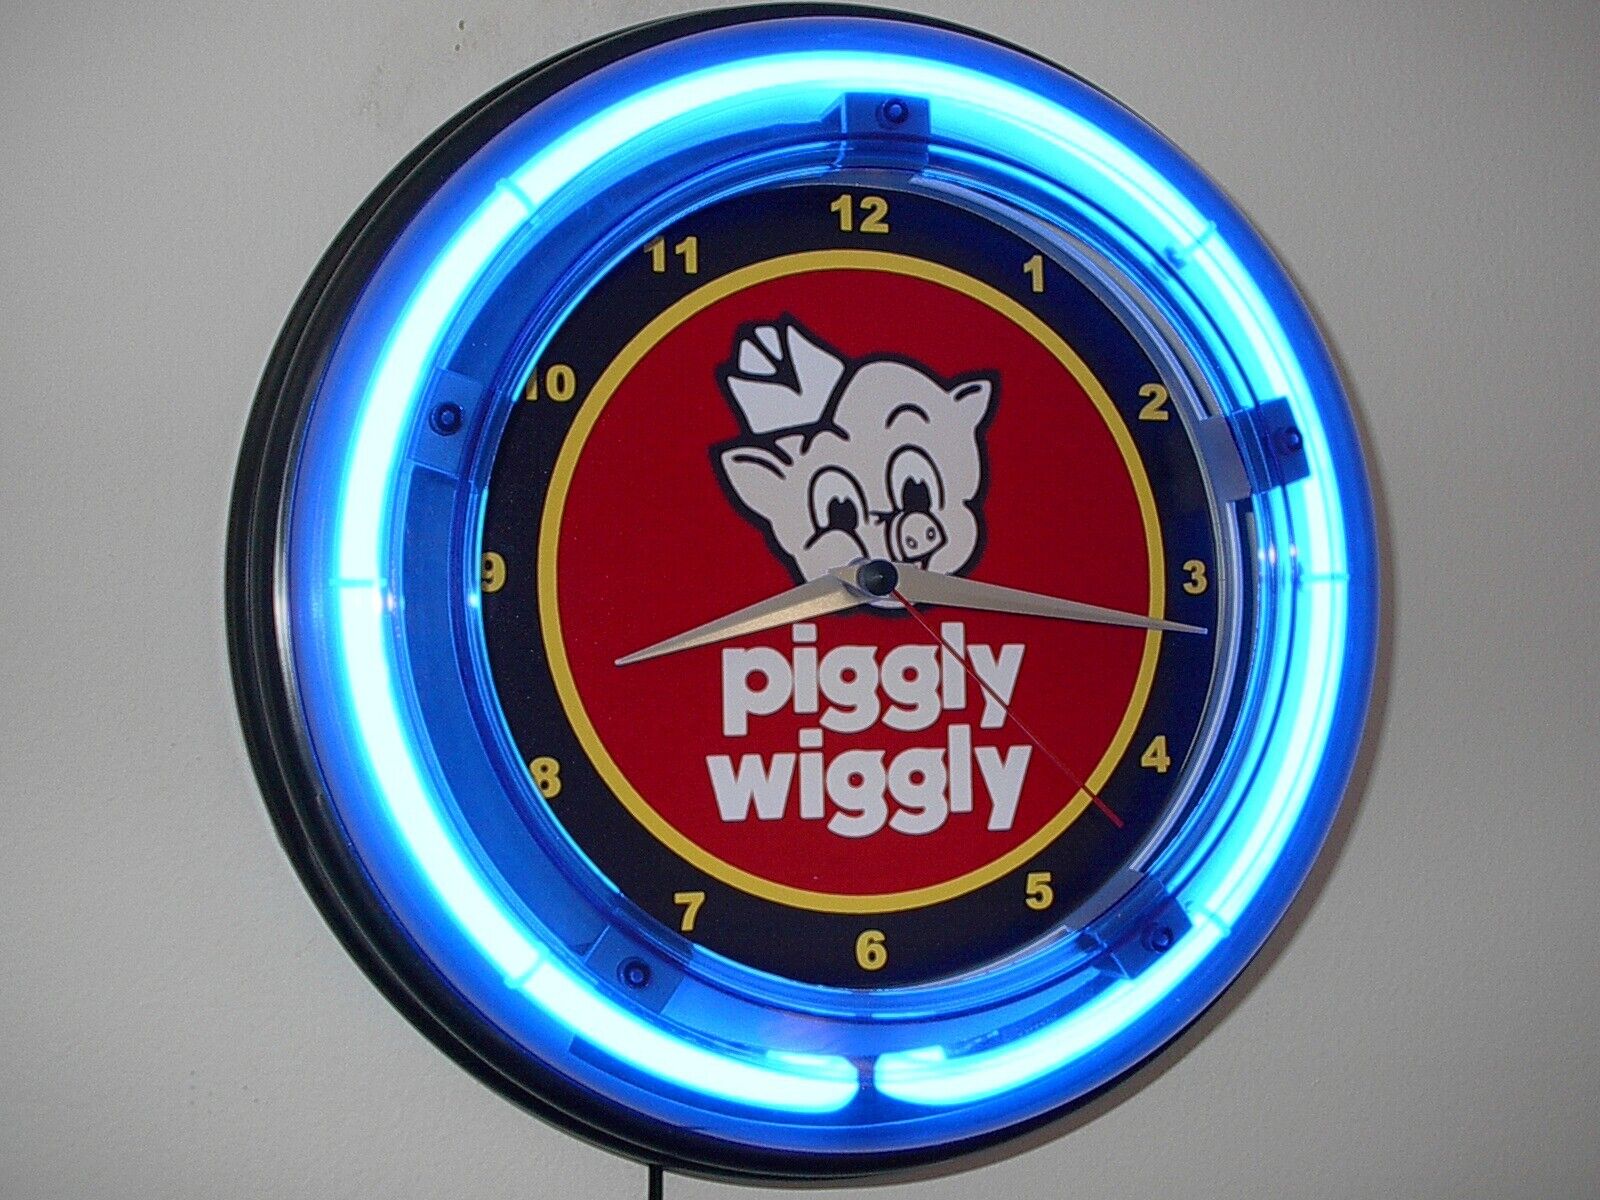 Piggly Wiggly Pig Grocery Store Advertising Kitchen Diner Neon Wall Clock Sign